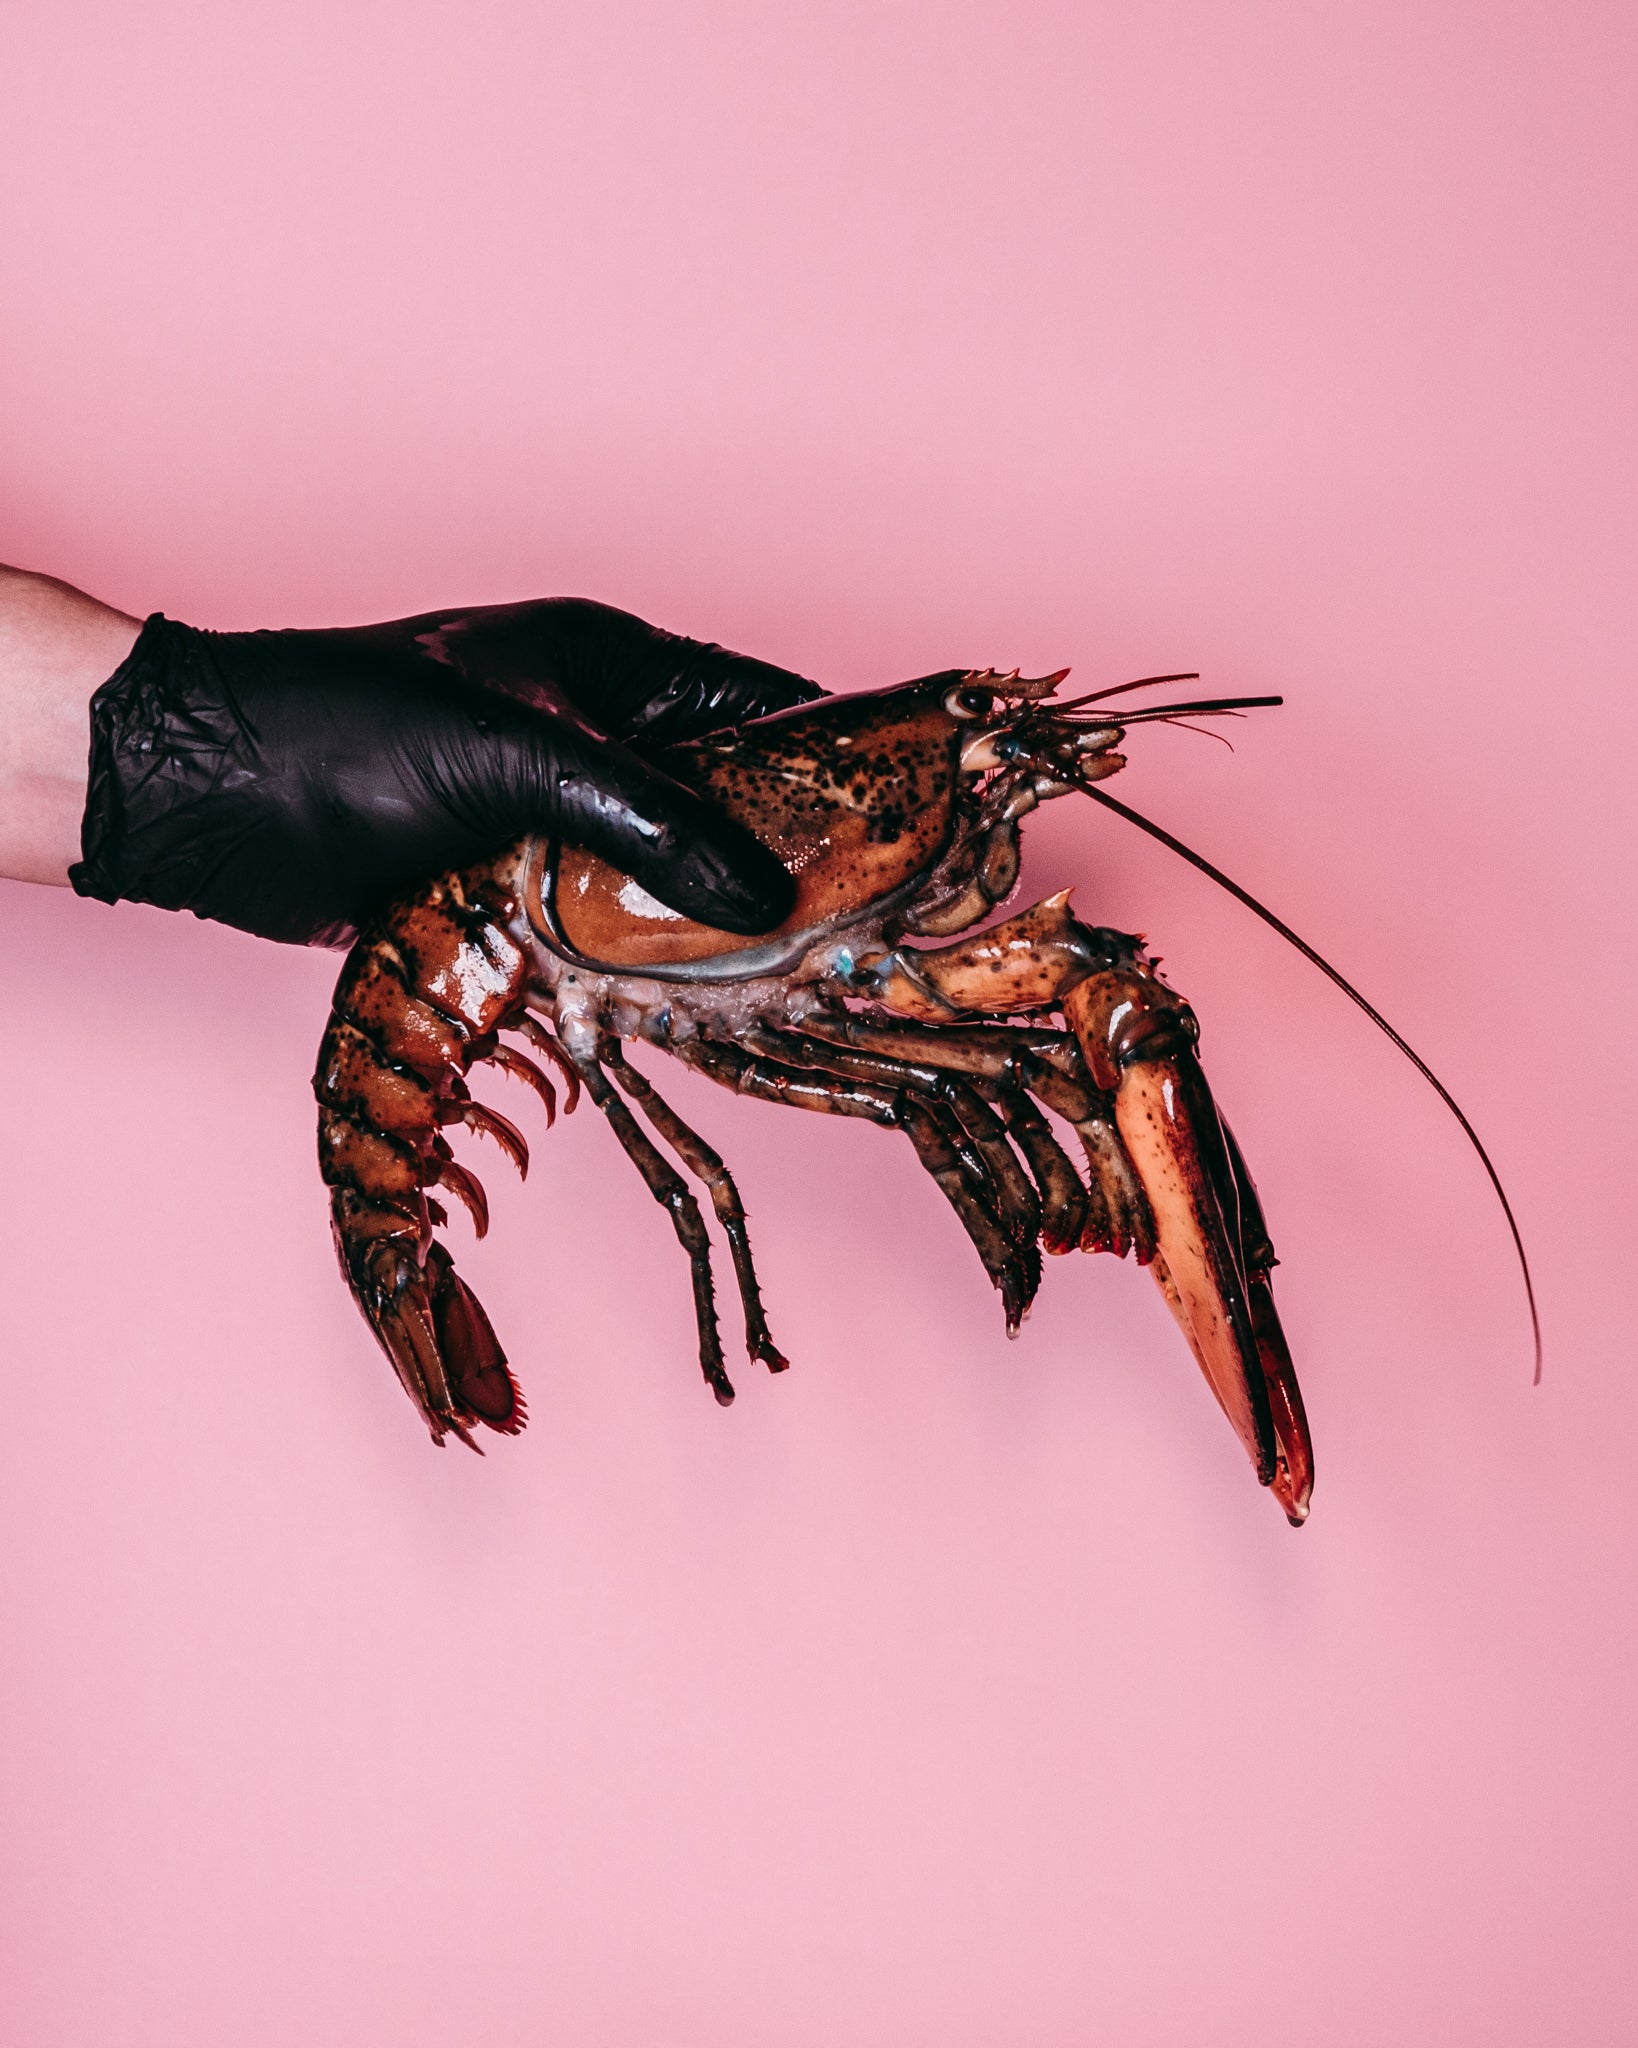 Whole Lobster (Raw)